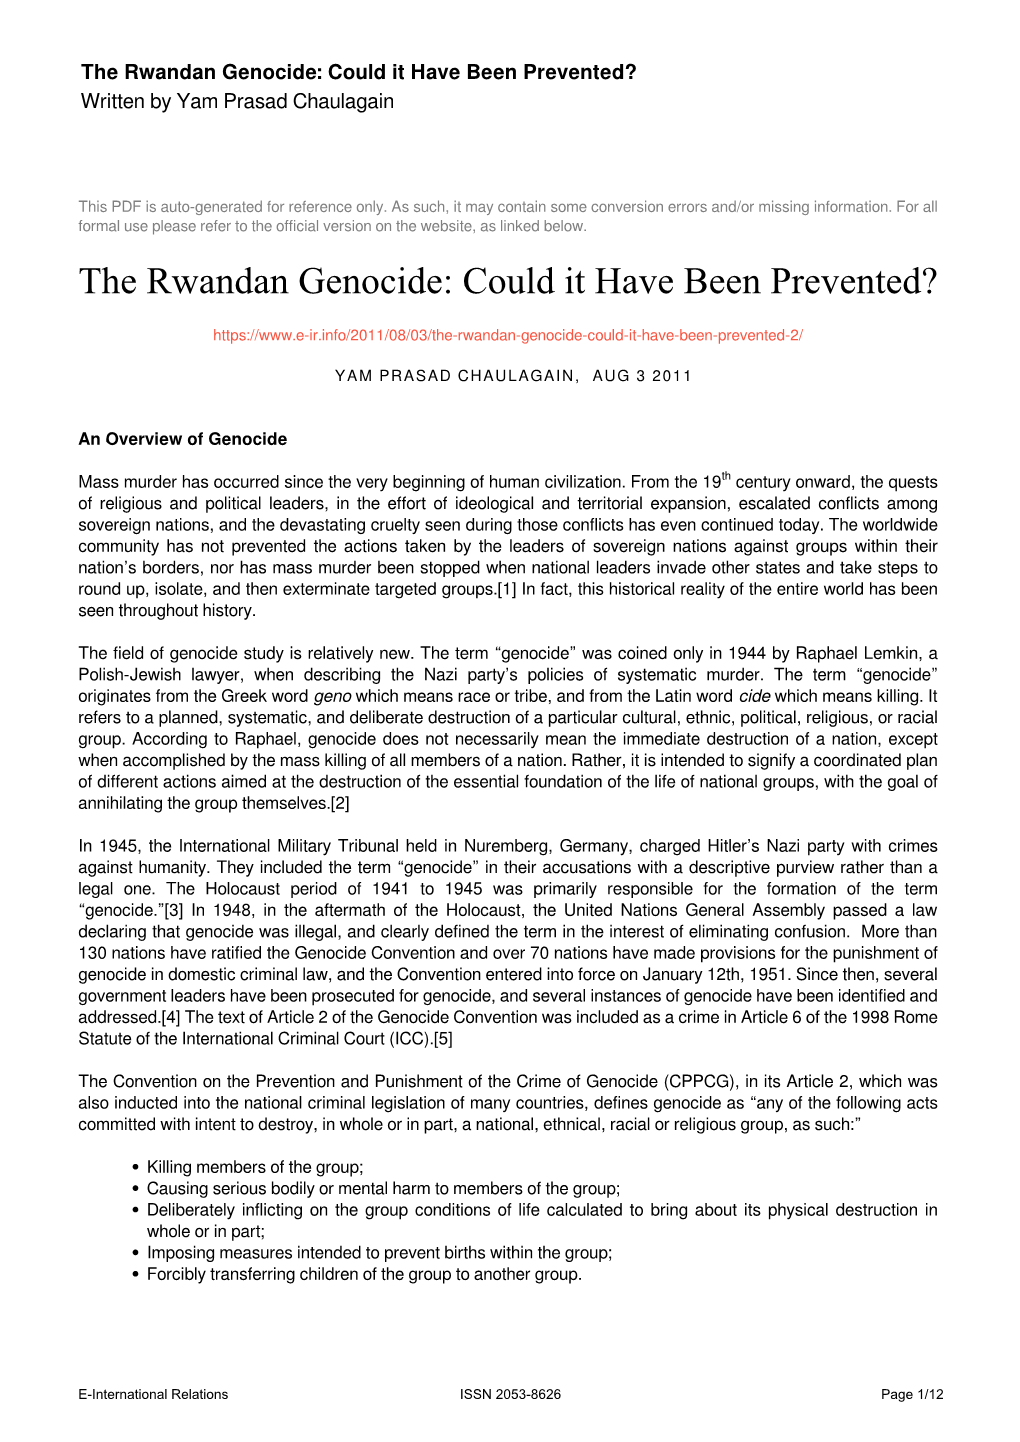 The Rwandan Genocide: Could It Have Been Prevented? Written by Yam Prasad Chaulagain